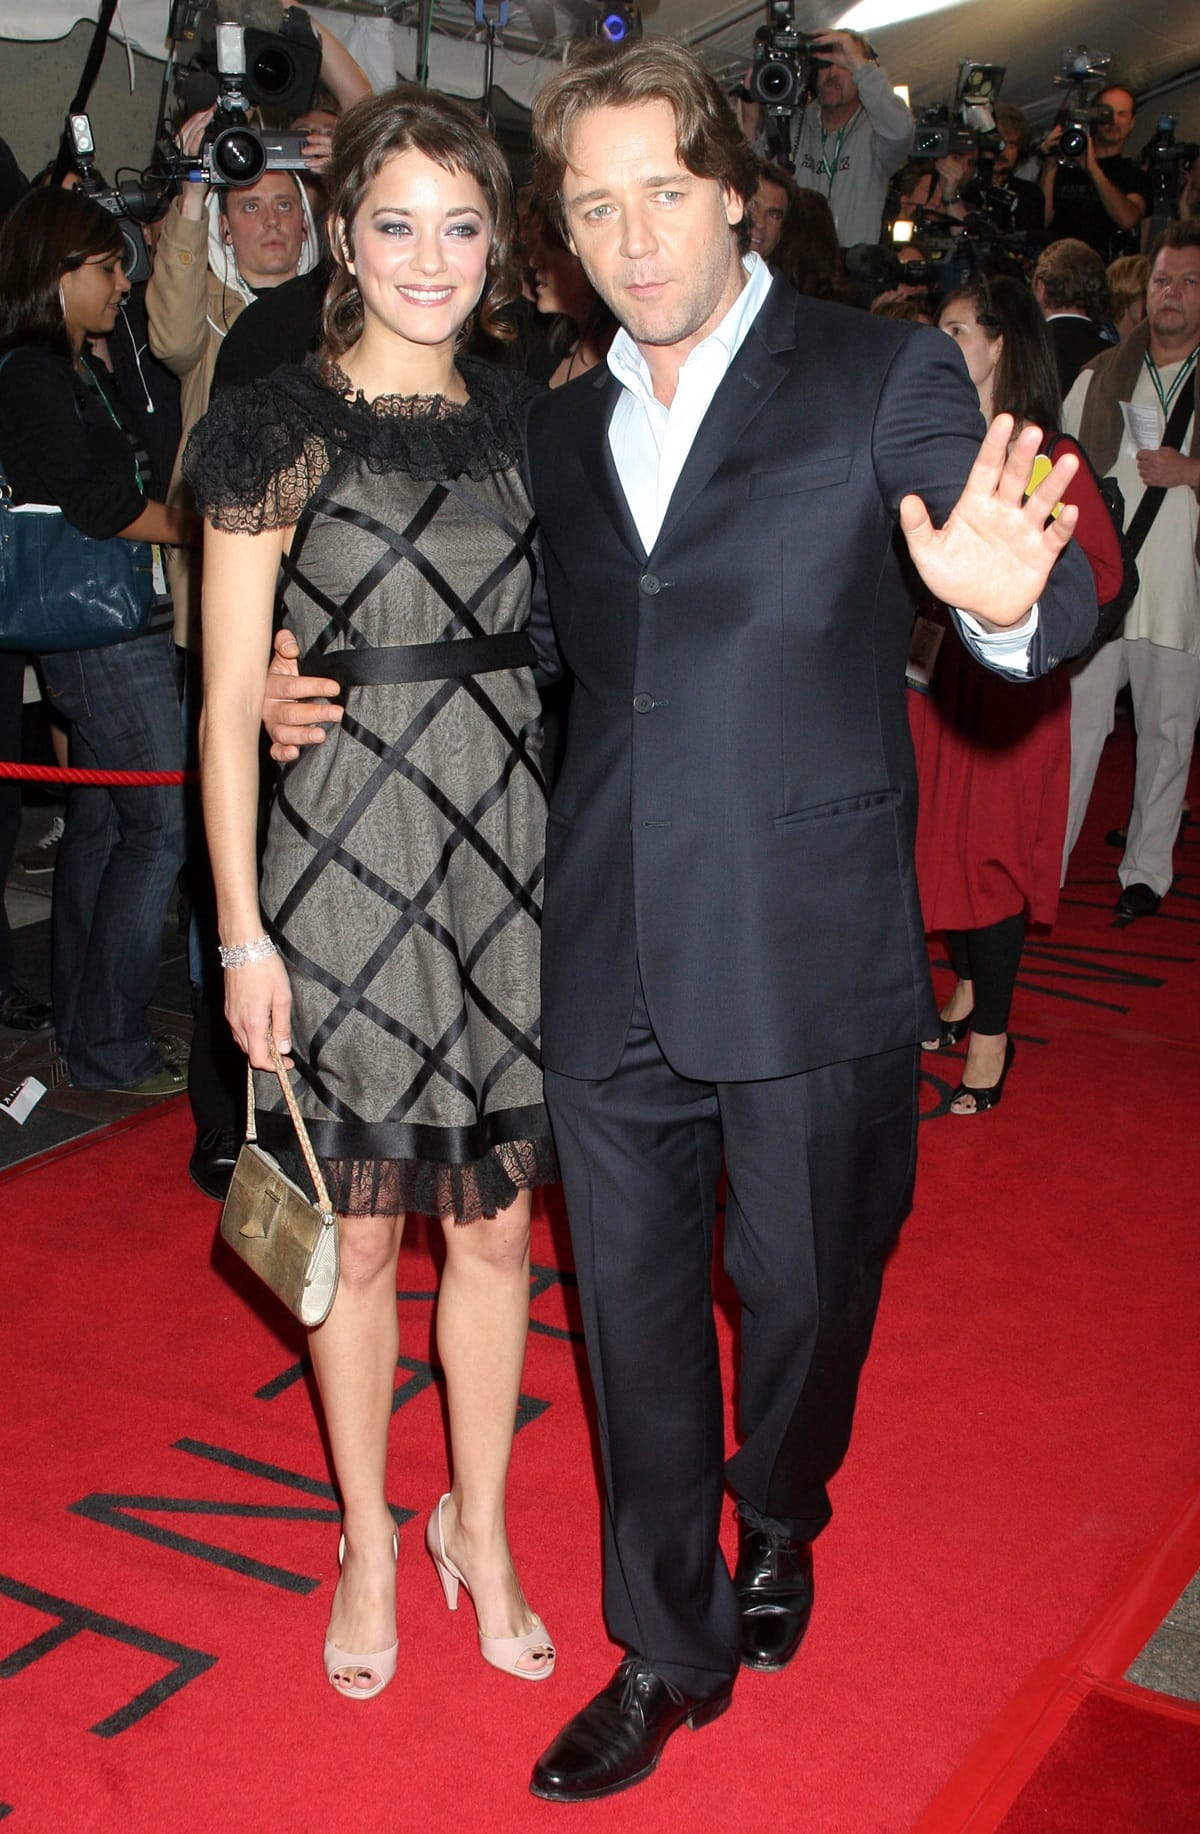 Actress Marion Cotillard and actor Russell Crowe attend the Toronto International Film Festival premiere screening of "The Good Year"